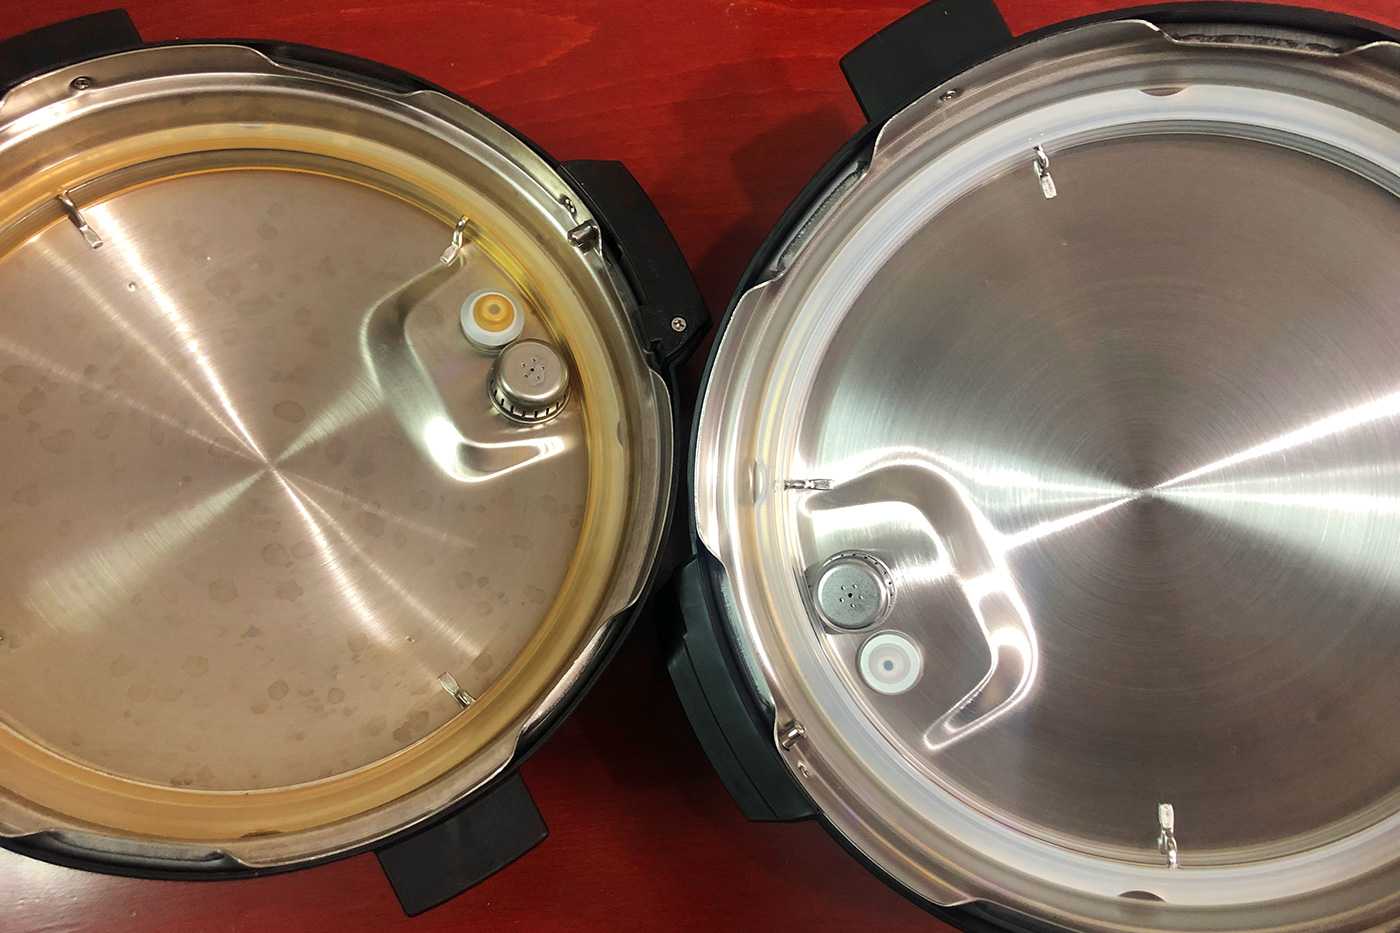 Tips for Cleaning Instant Pot Sealing Ring